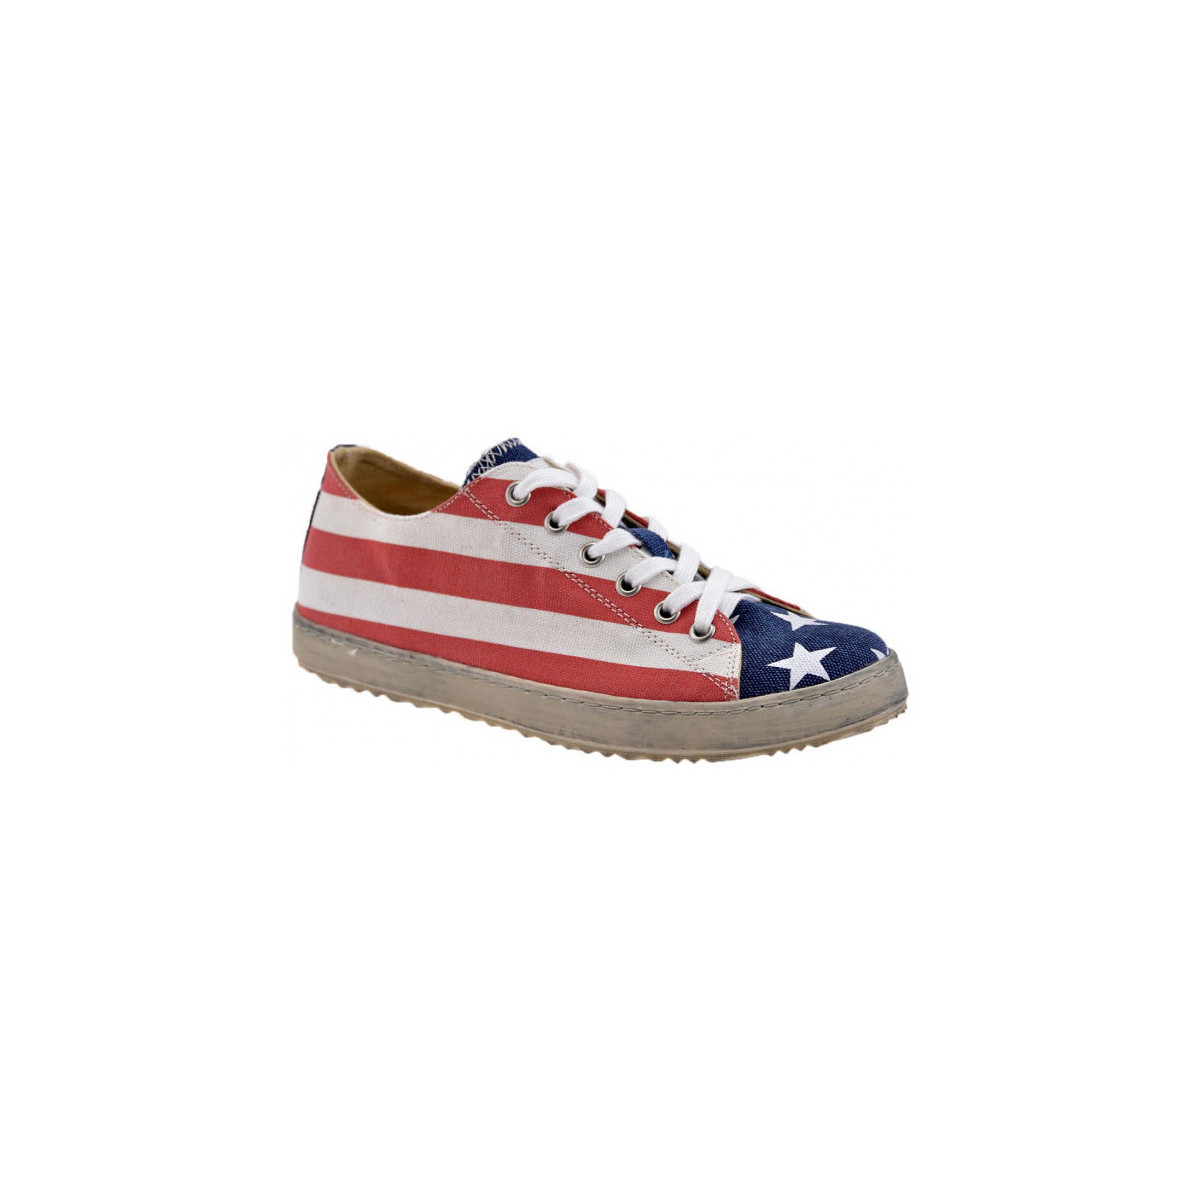 Schoenen Dames Sneakers F. Milano USA Flag  Low Other